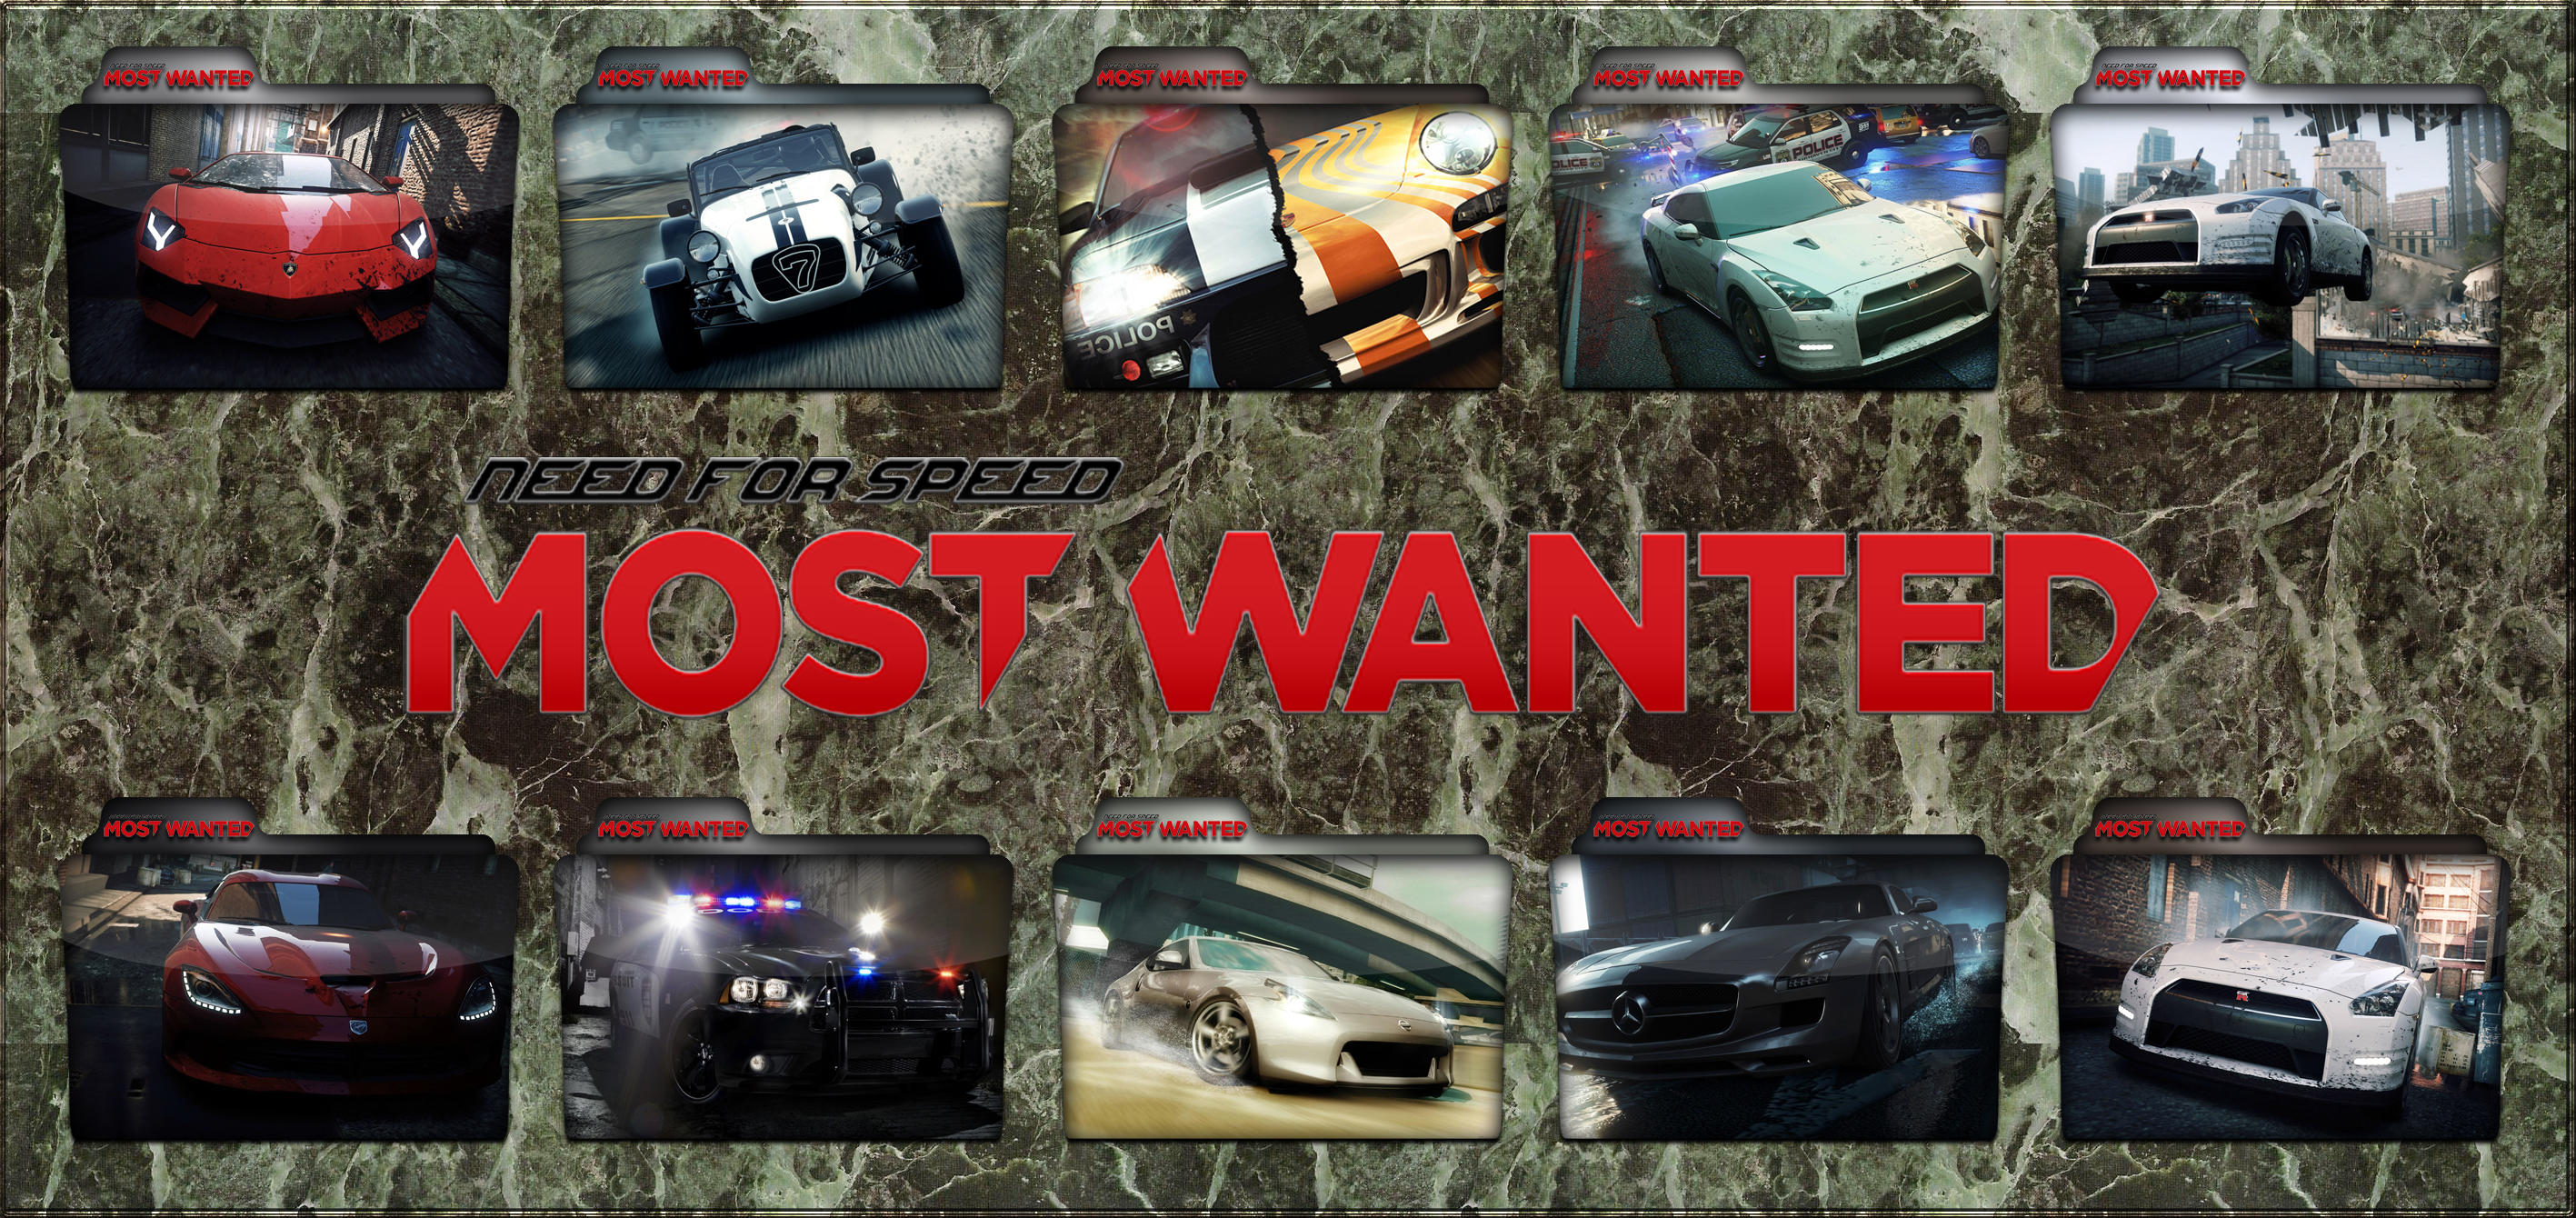 Need for Speed Most Wanted by lewamora4ok on DeviantArt